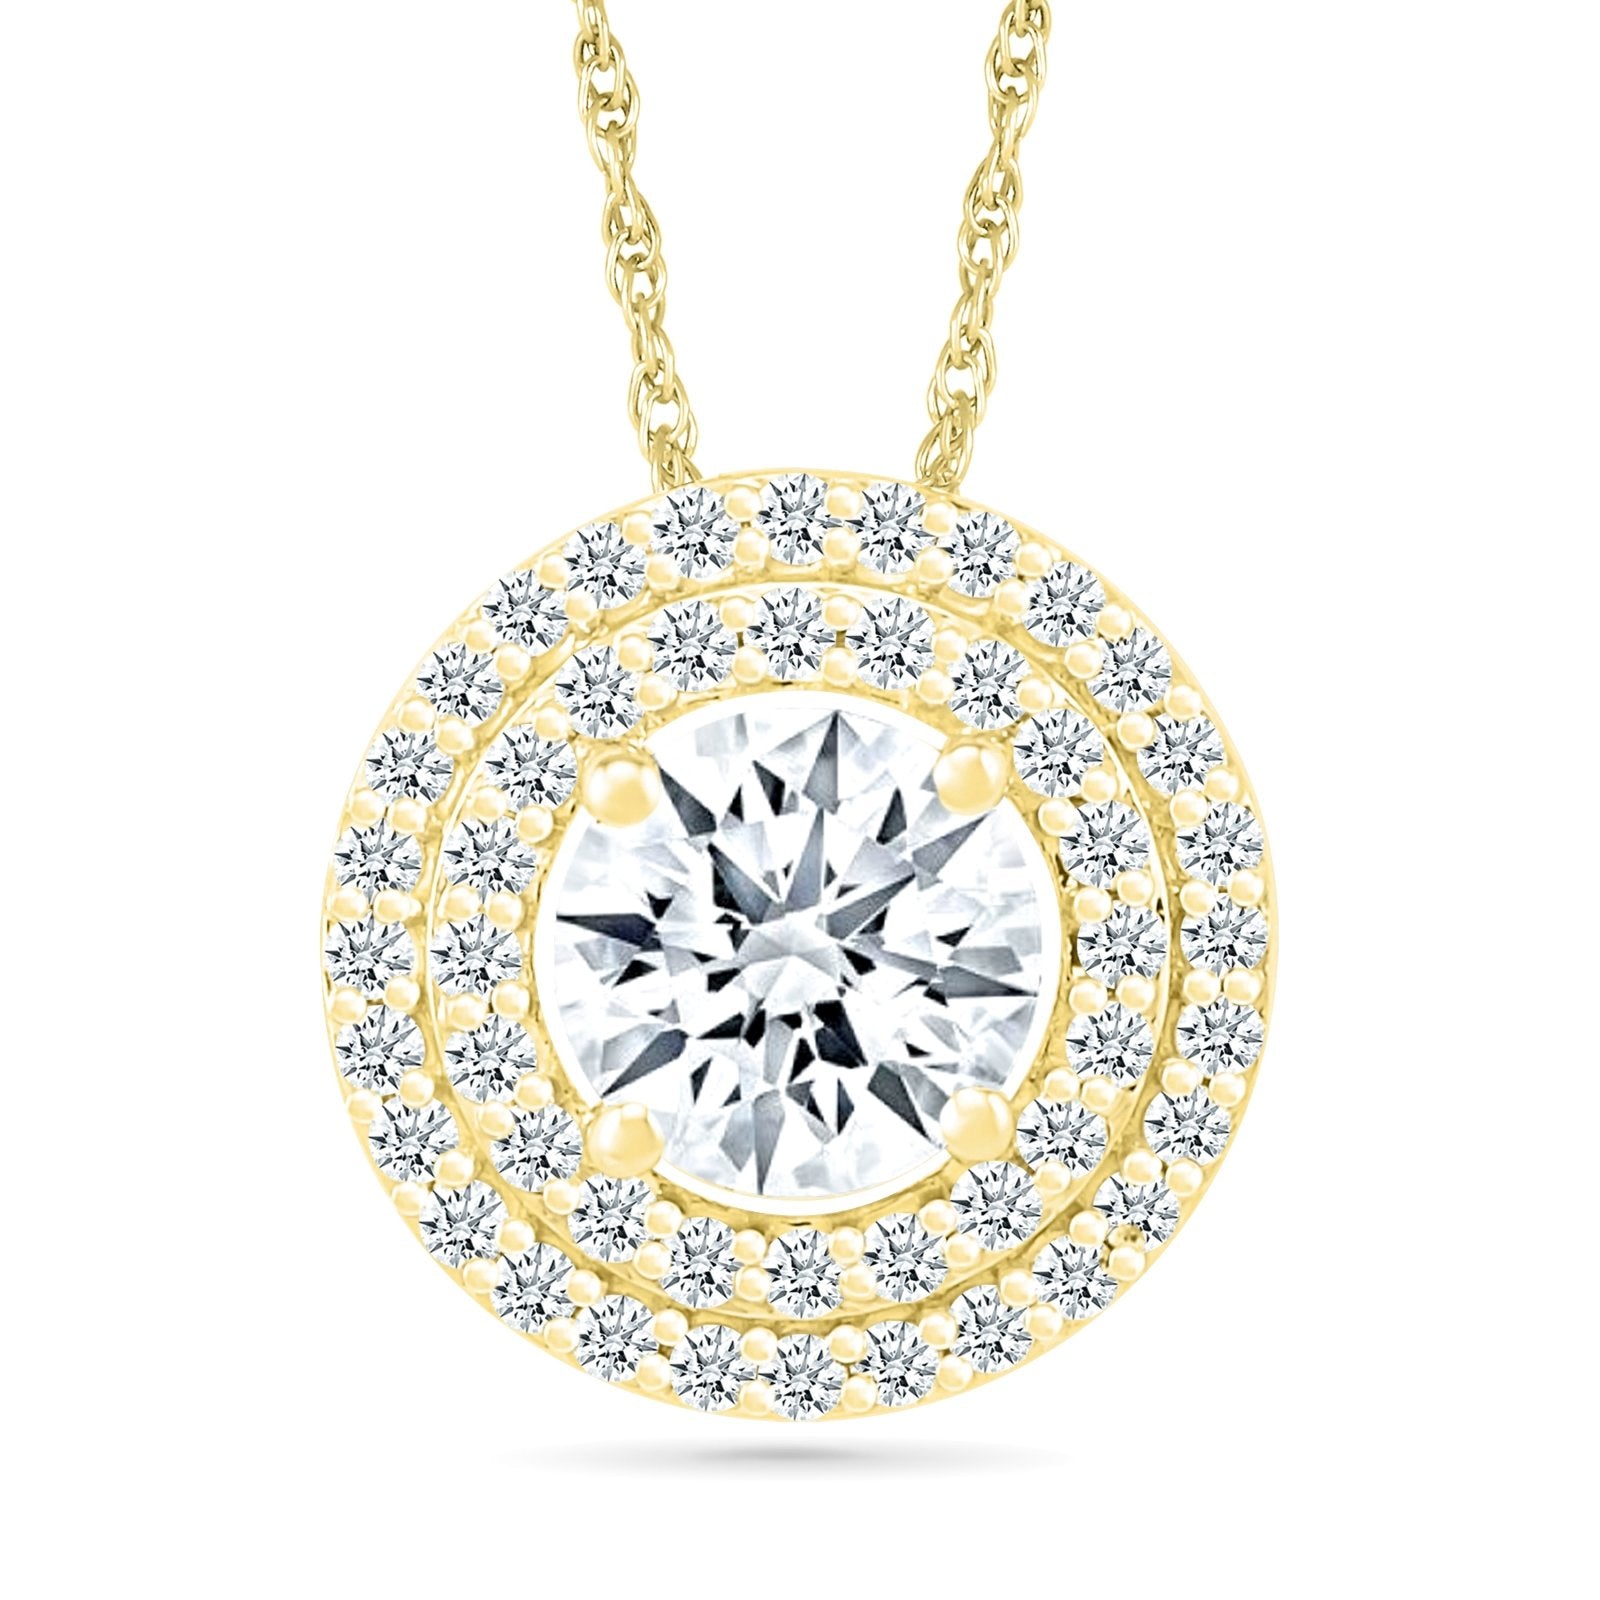 Round White Sapphire Pendant with Double White Sapphire Halo Necklaces Estella Collection 32722 Made to Order White Sapphire Yellow Gold #tag4# #tag5# #tag6# #tag7# #tag8# #tag9# #tag10#